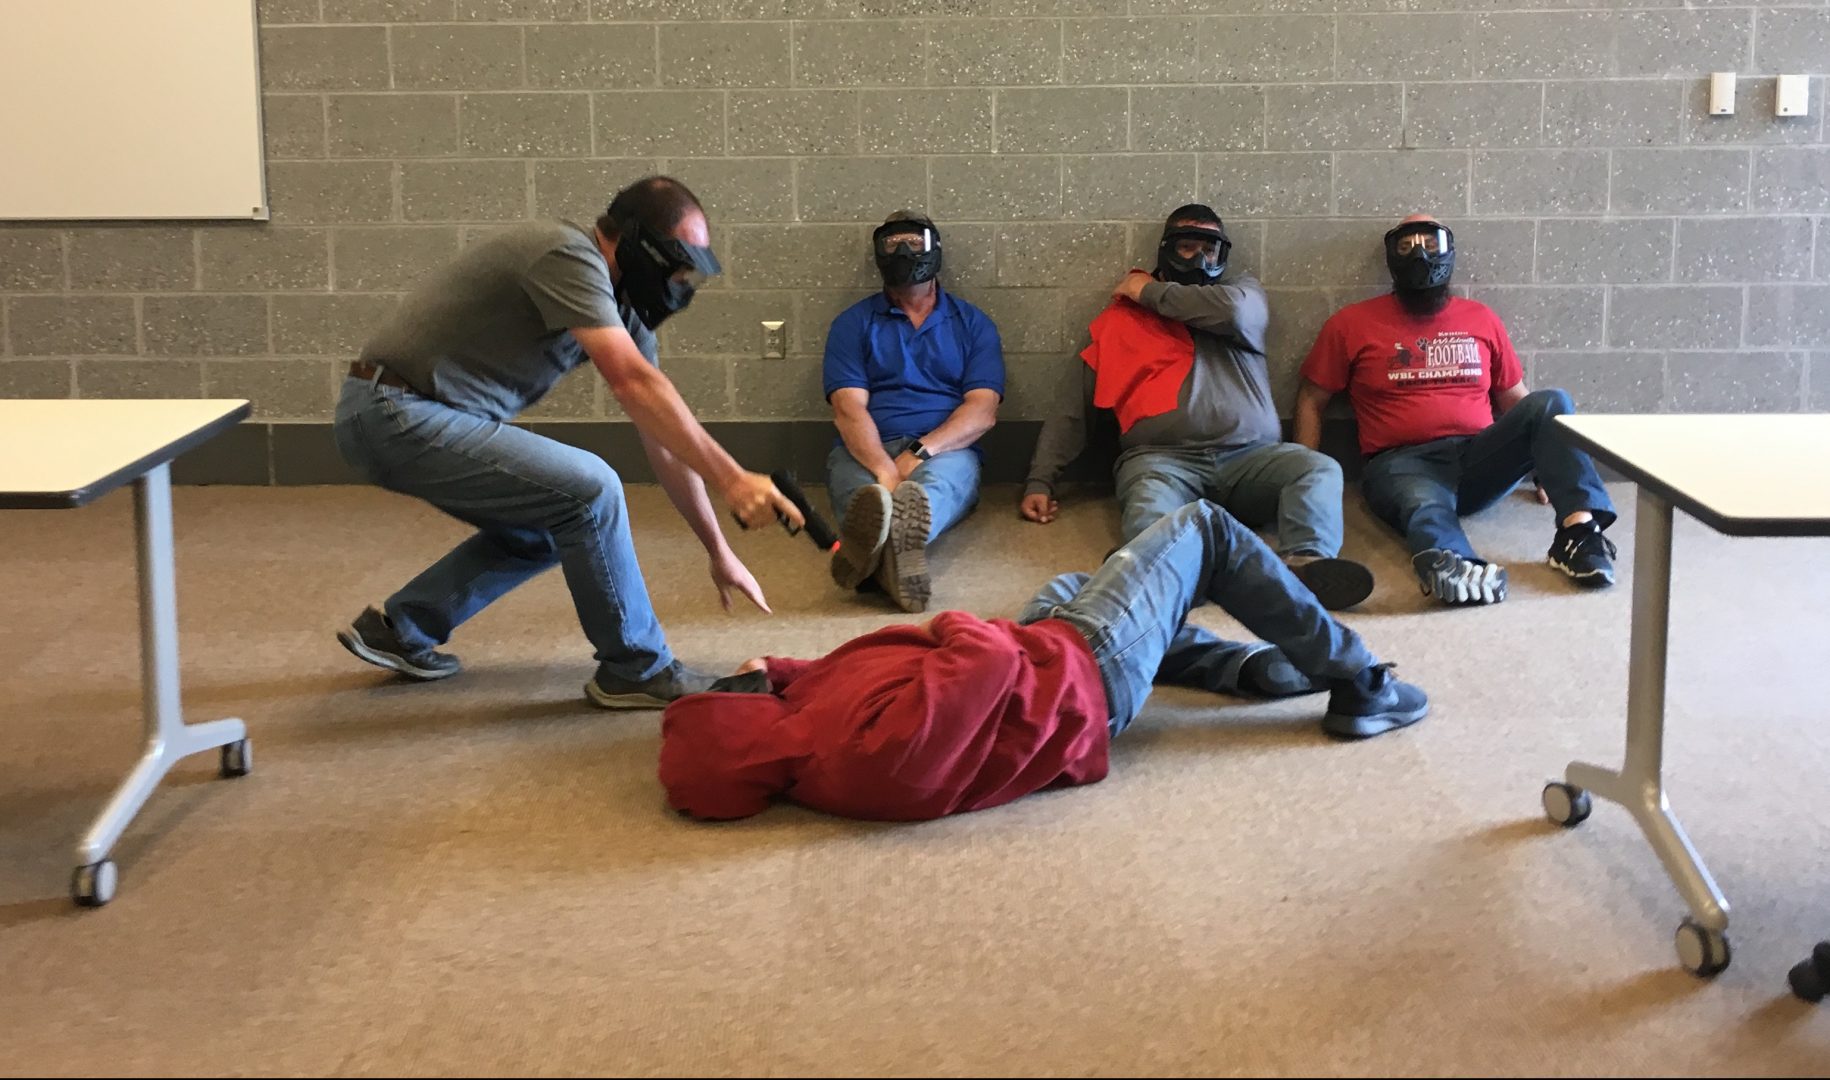 Teachers practice responding to active shooter scenarios at Wadsworth High School in Ohio. Cerino tells the trainees pretending to be students, 